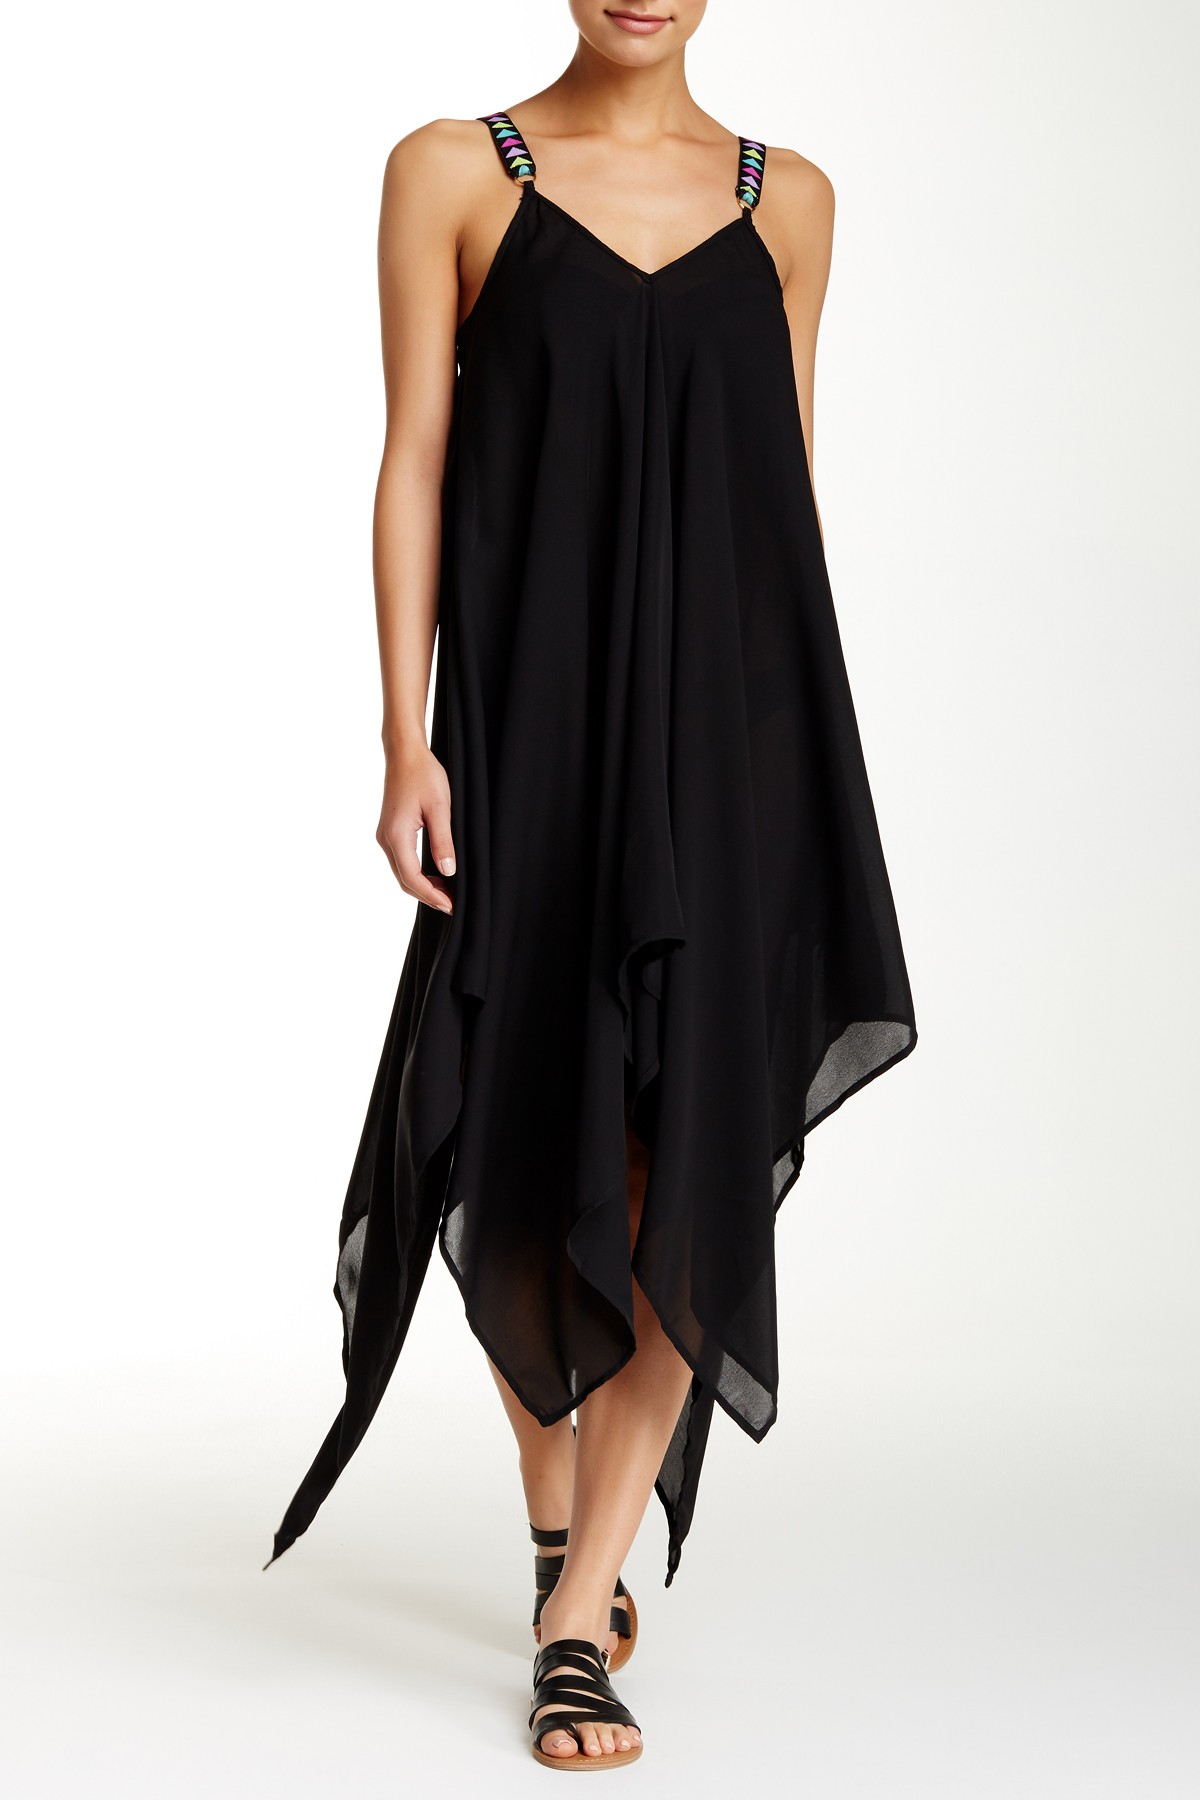 Jessica Simpson Chiffon Cover-up Dress in Black - Lyst1200 x 1800